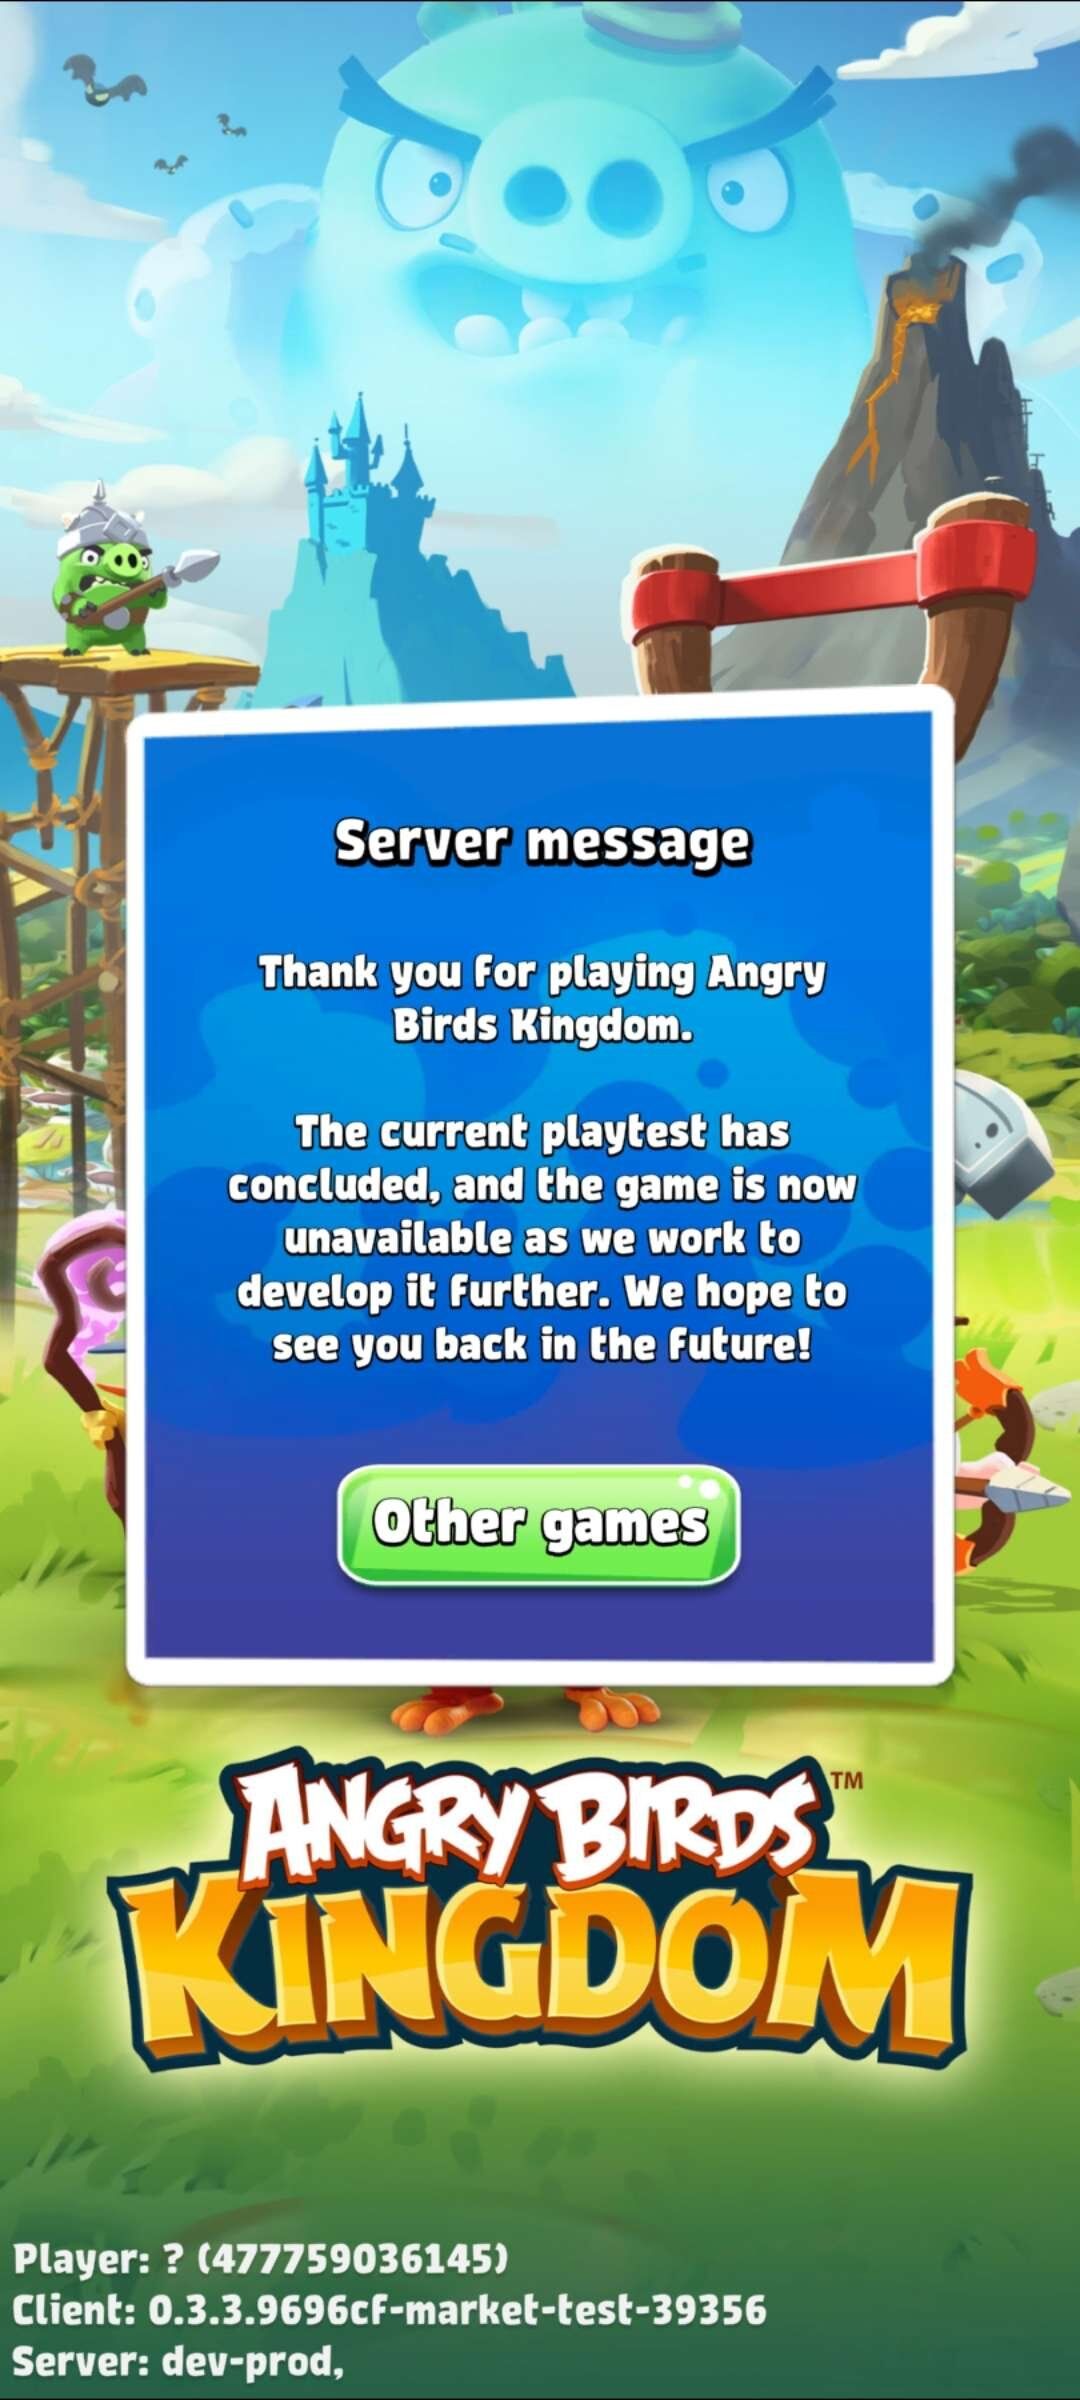 Got this popup while playing Angry Birds Epic. I hope this is a